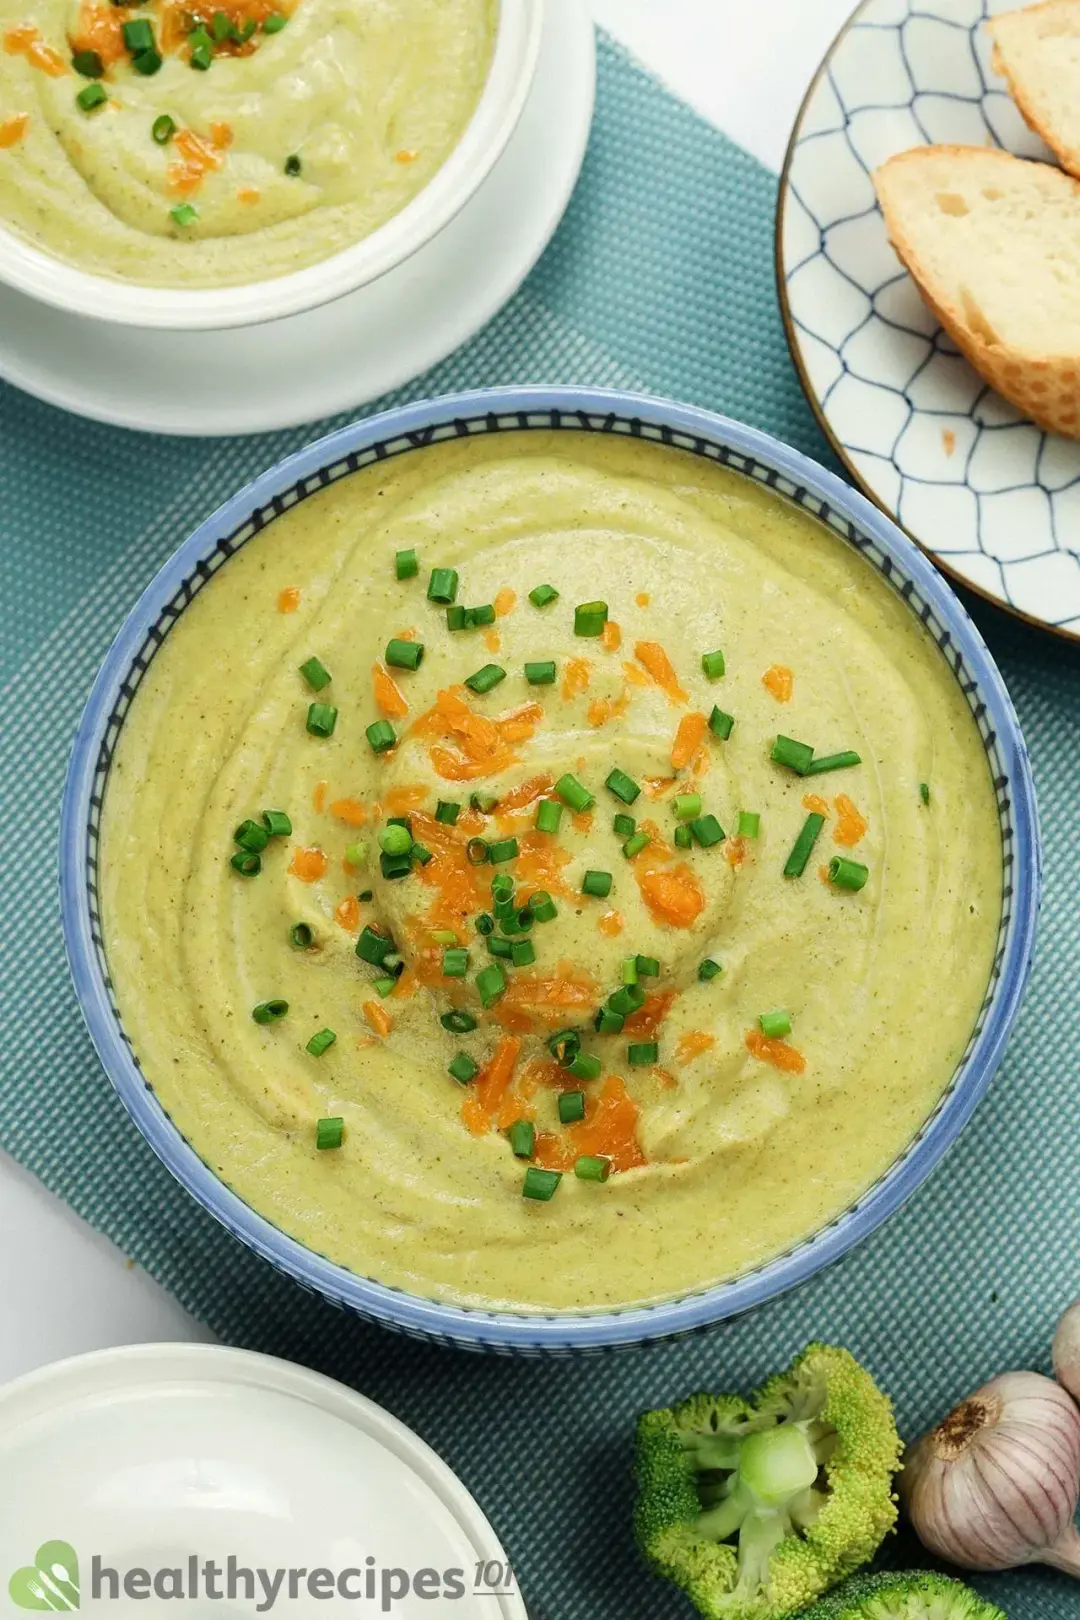 How to Make Broccoli Cheese Soup Thicker